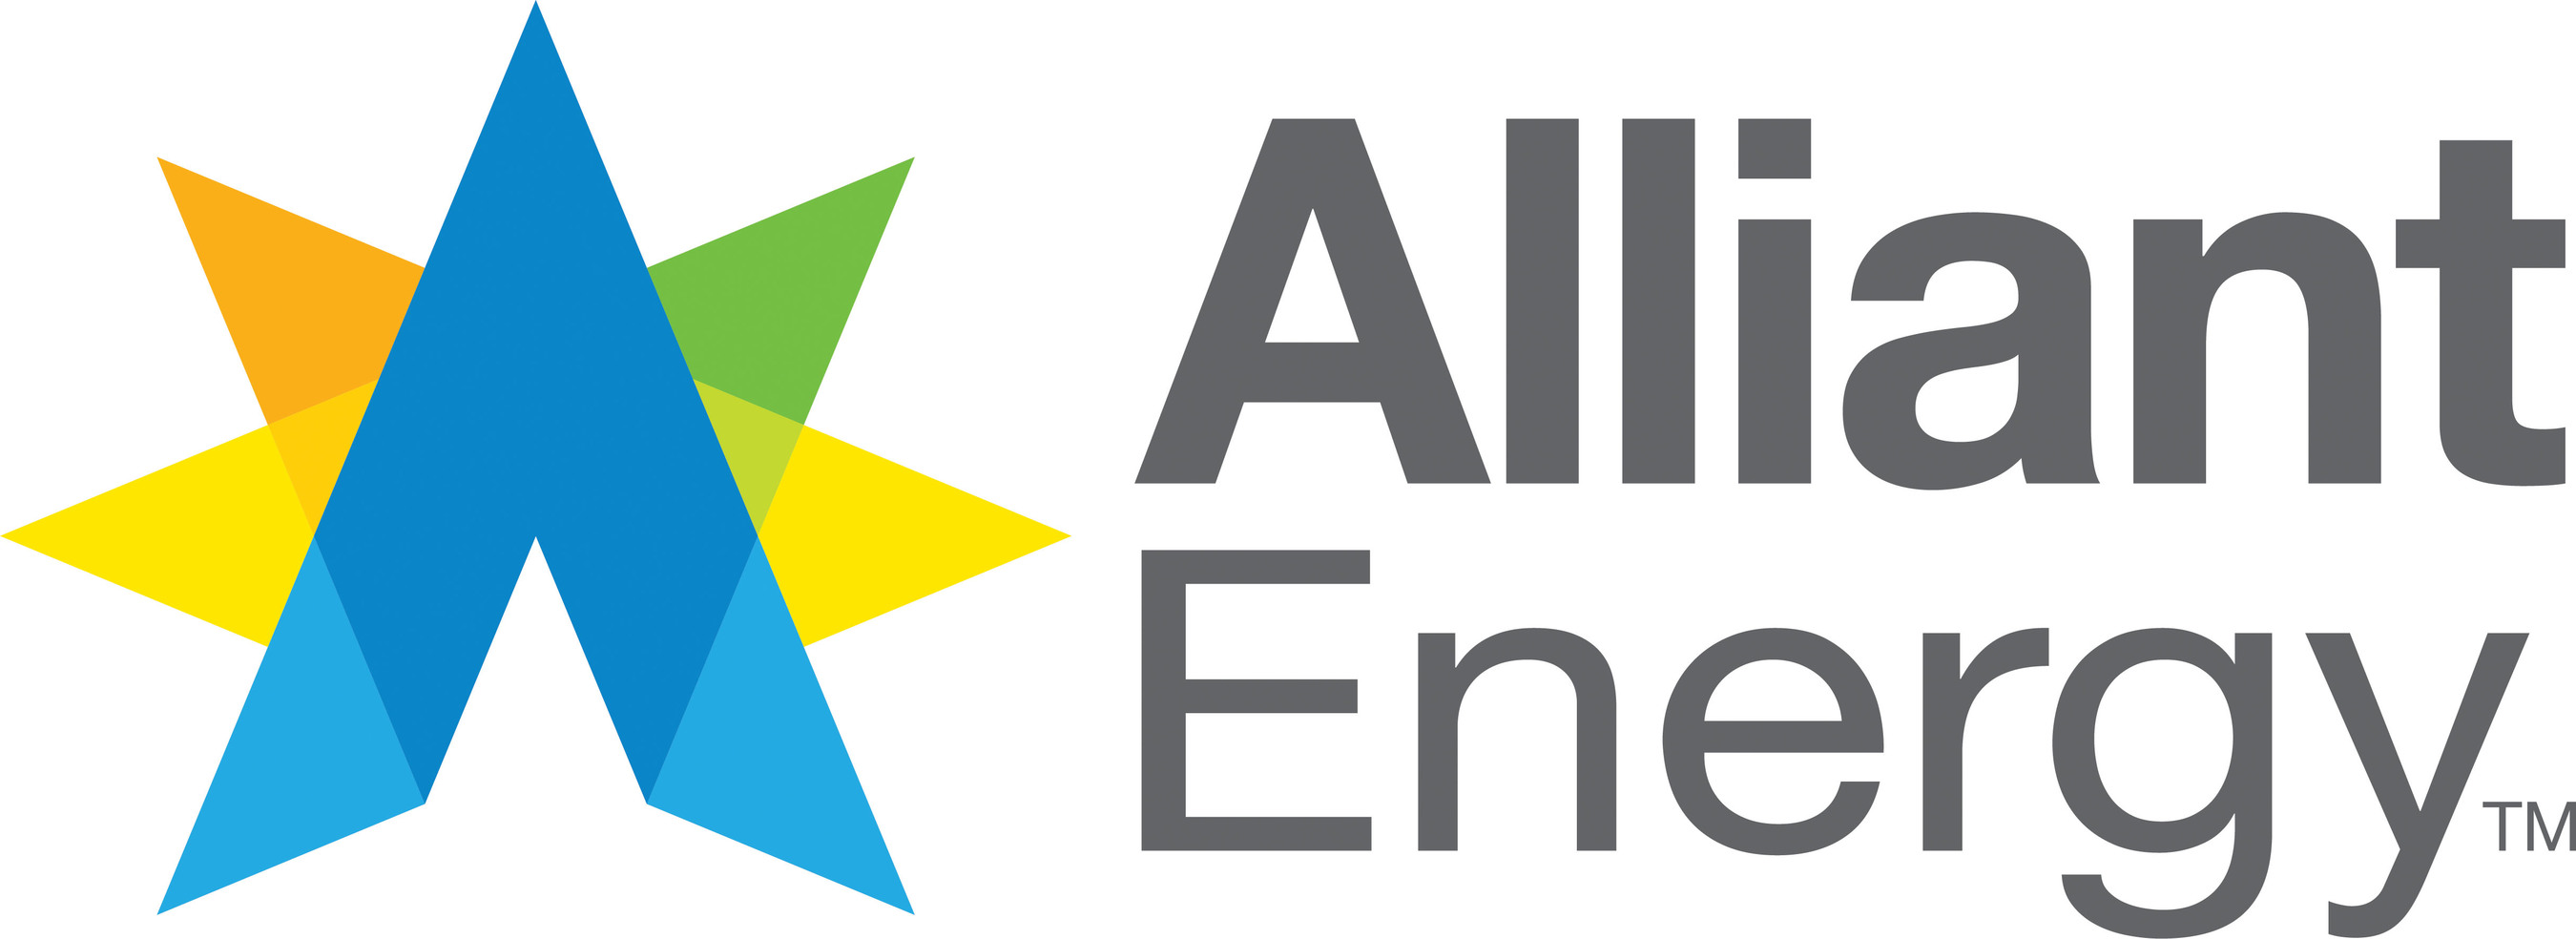 Alliant Energy is the parent company of two public utility companies--Interstate Power and Light Company (IPL) and Wisconsin Power and Light Company (WPL)--and of Alliant Energy Resources, Inc. (AER), the parent company of Alliant Energy's non-regulated operations. (PRNewsFoto/ALLIANT ENERGY CORPORATION) (PRNewsFoto/Alliant Energy Corporation)